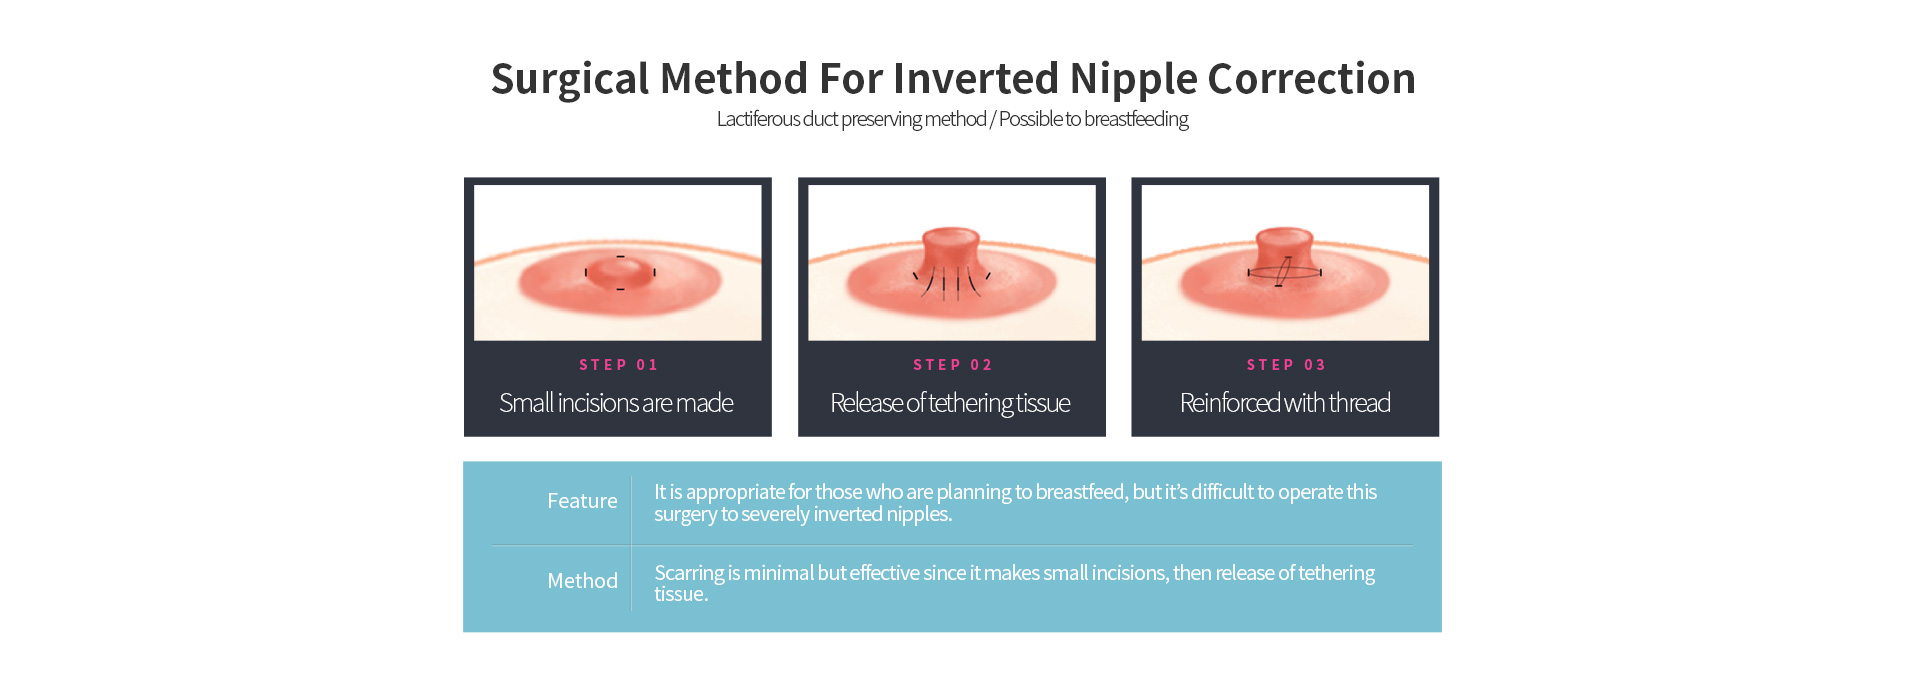 Surgical Method For Inverted Nipple Correction, step 1. Small incisions are made, step 2. Release of tethering tissue, step 3. Reinforced with thread